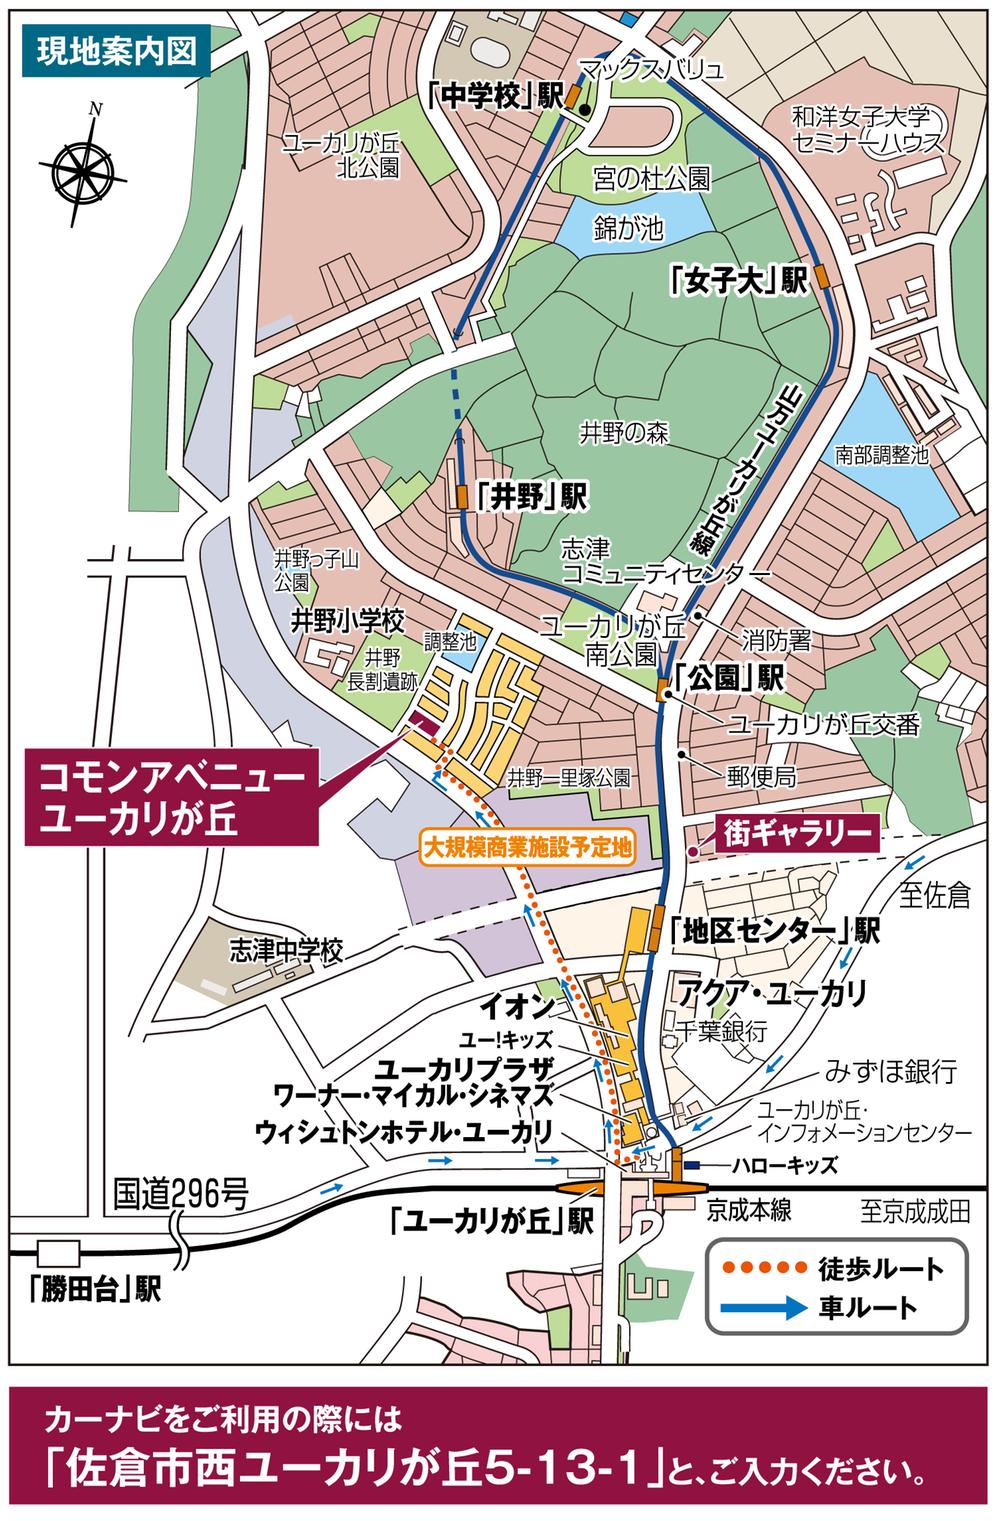 Other. Local guide map March 2012, Road is now a 14-minute walk from the opening to Yūkarigaoka Station.